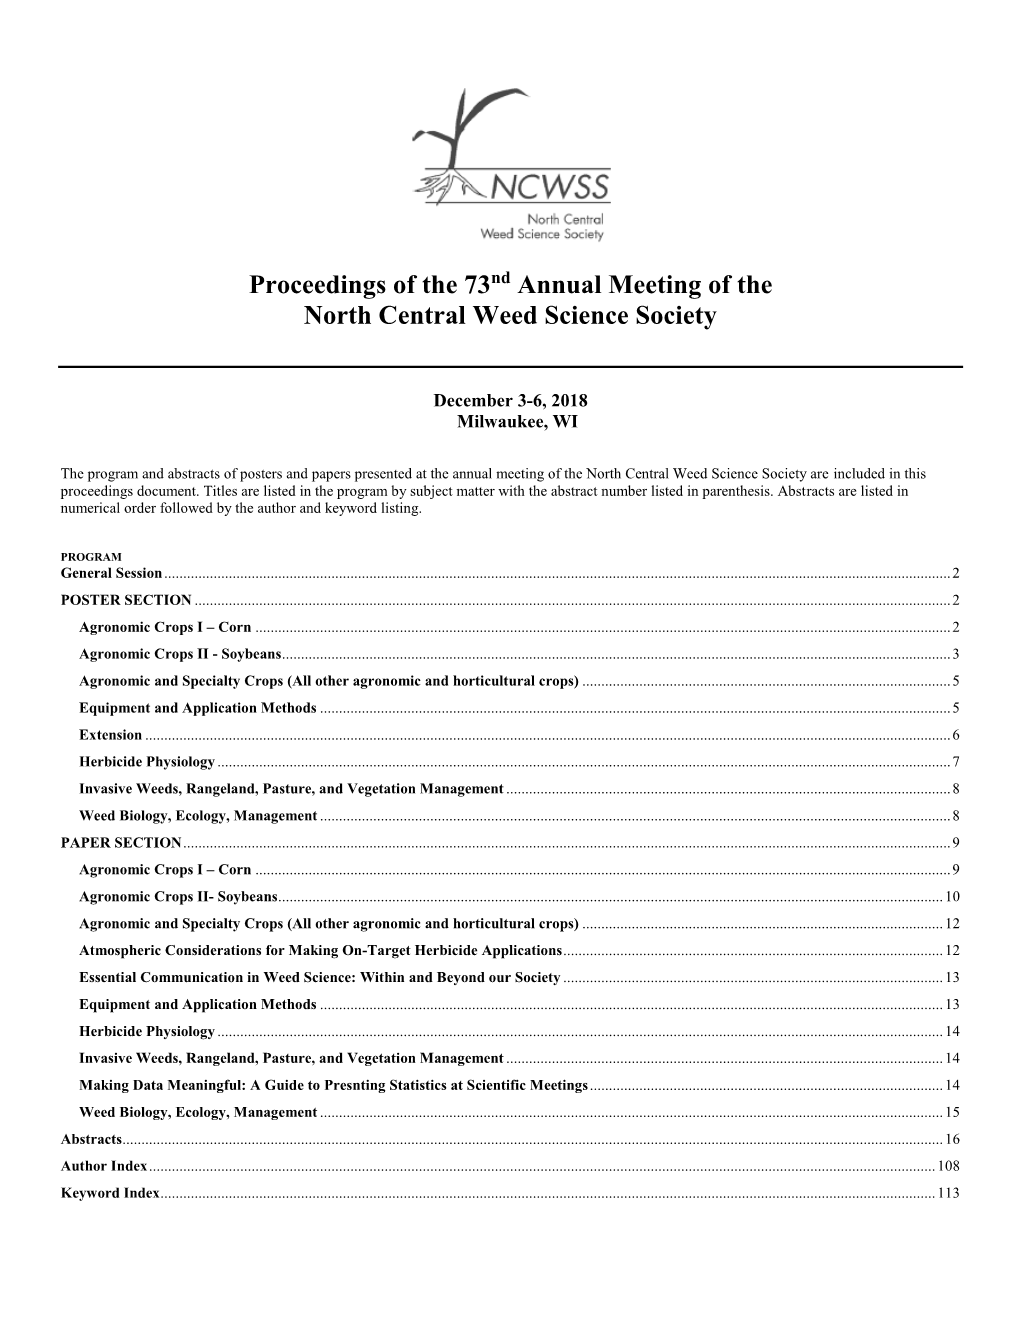 Proceedings of the 73Nd Annual Meeting of the North Central Weed Science Society